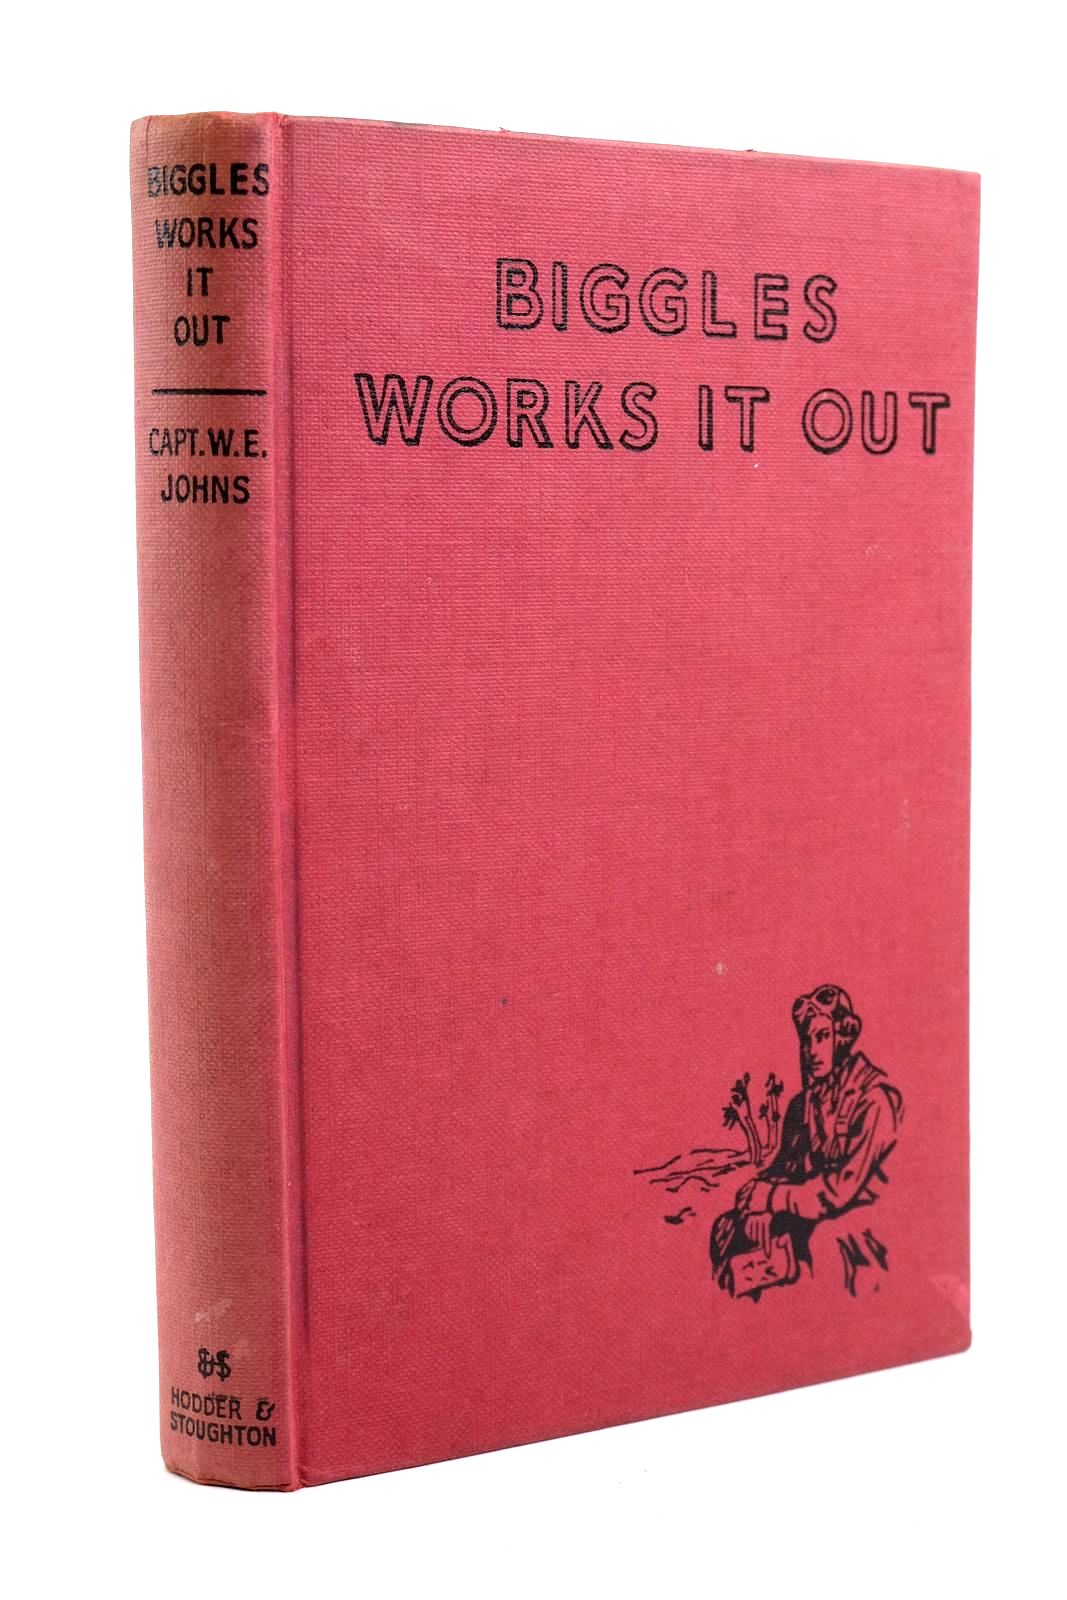 Photo of BIGGLES WORKS IT OUT written by Johns, W.E. illustrated by Stead,  published by Hodder & Stoughton (STOCK CODE: 1320688)  for sale by Stella & Rose's Books